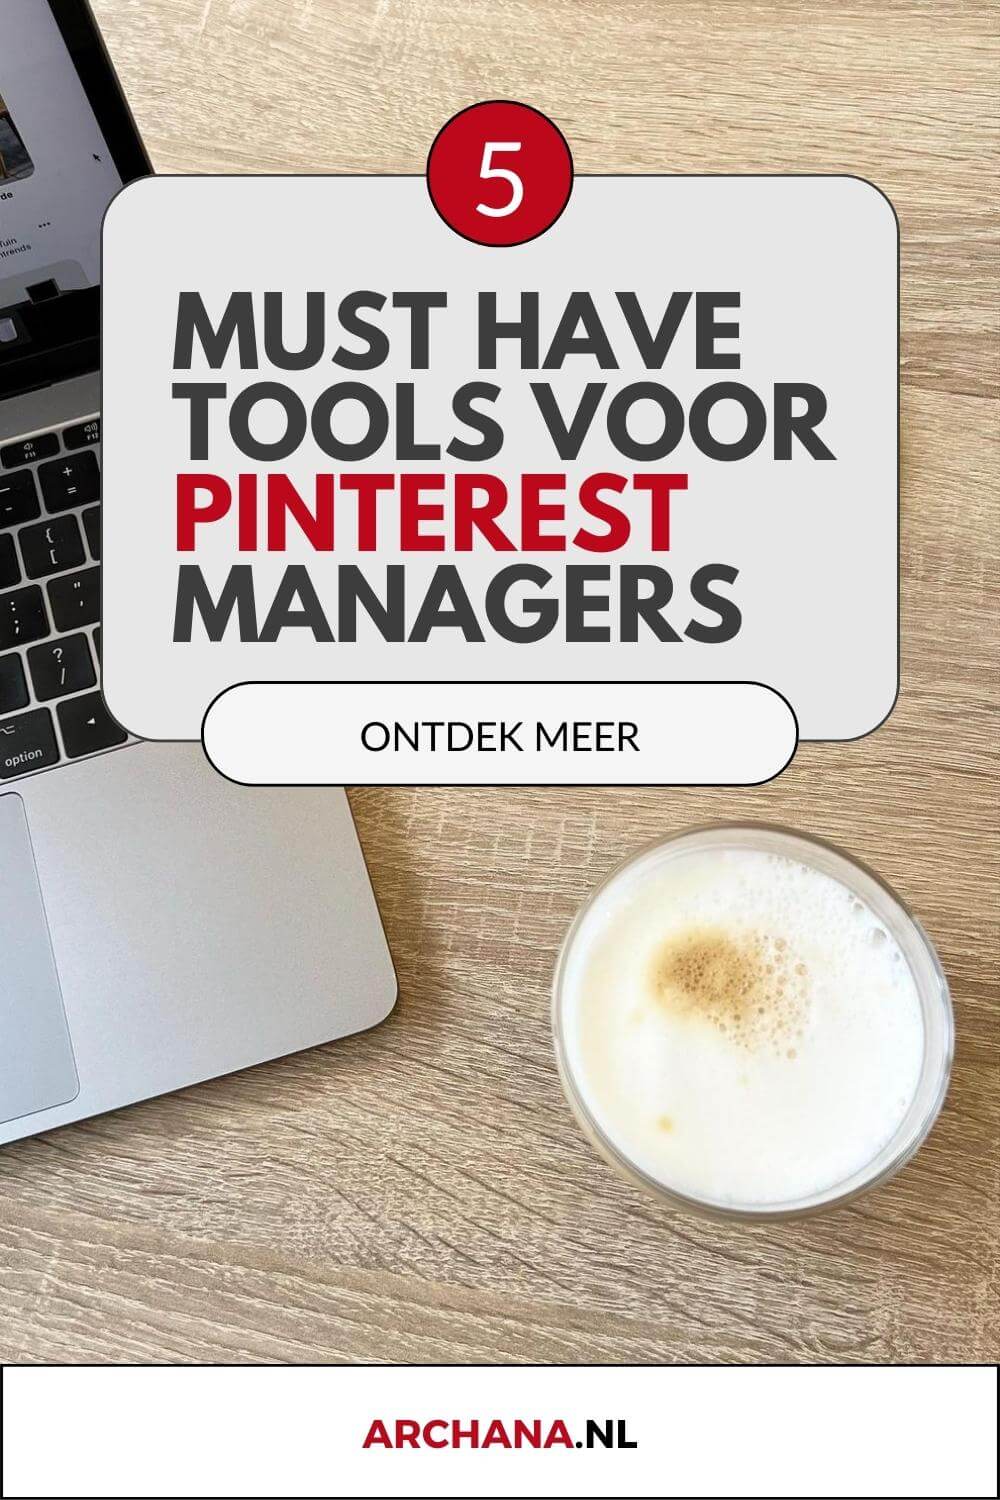 5 must have tools voor Pinterest managers - ARCHANA.NL